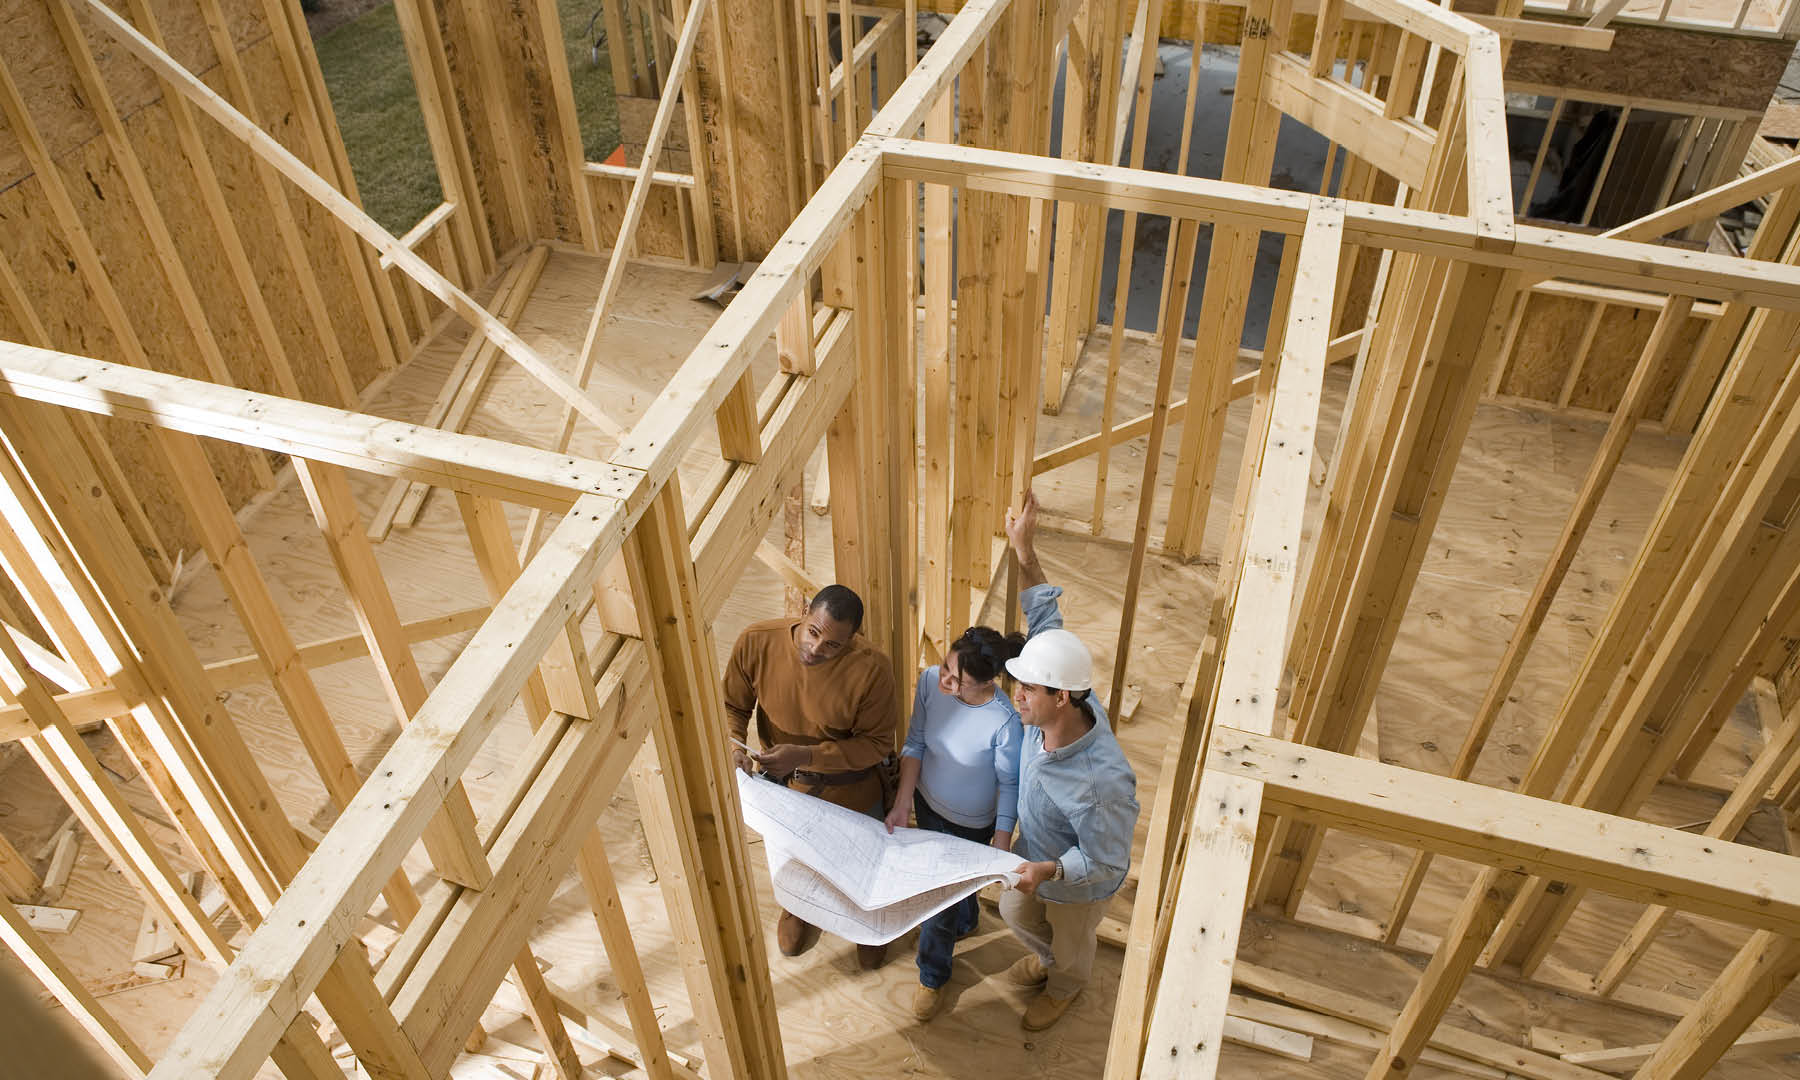 Use a Construction Loan to Build the Home of Your Dreams